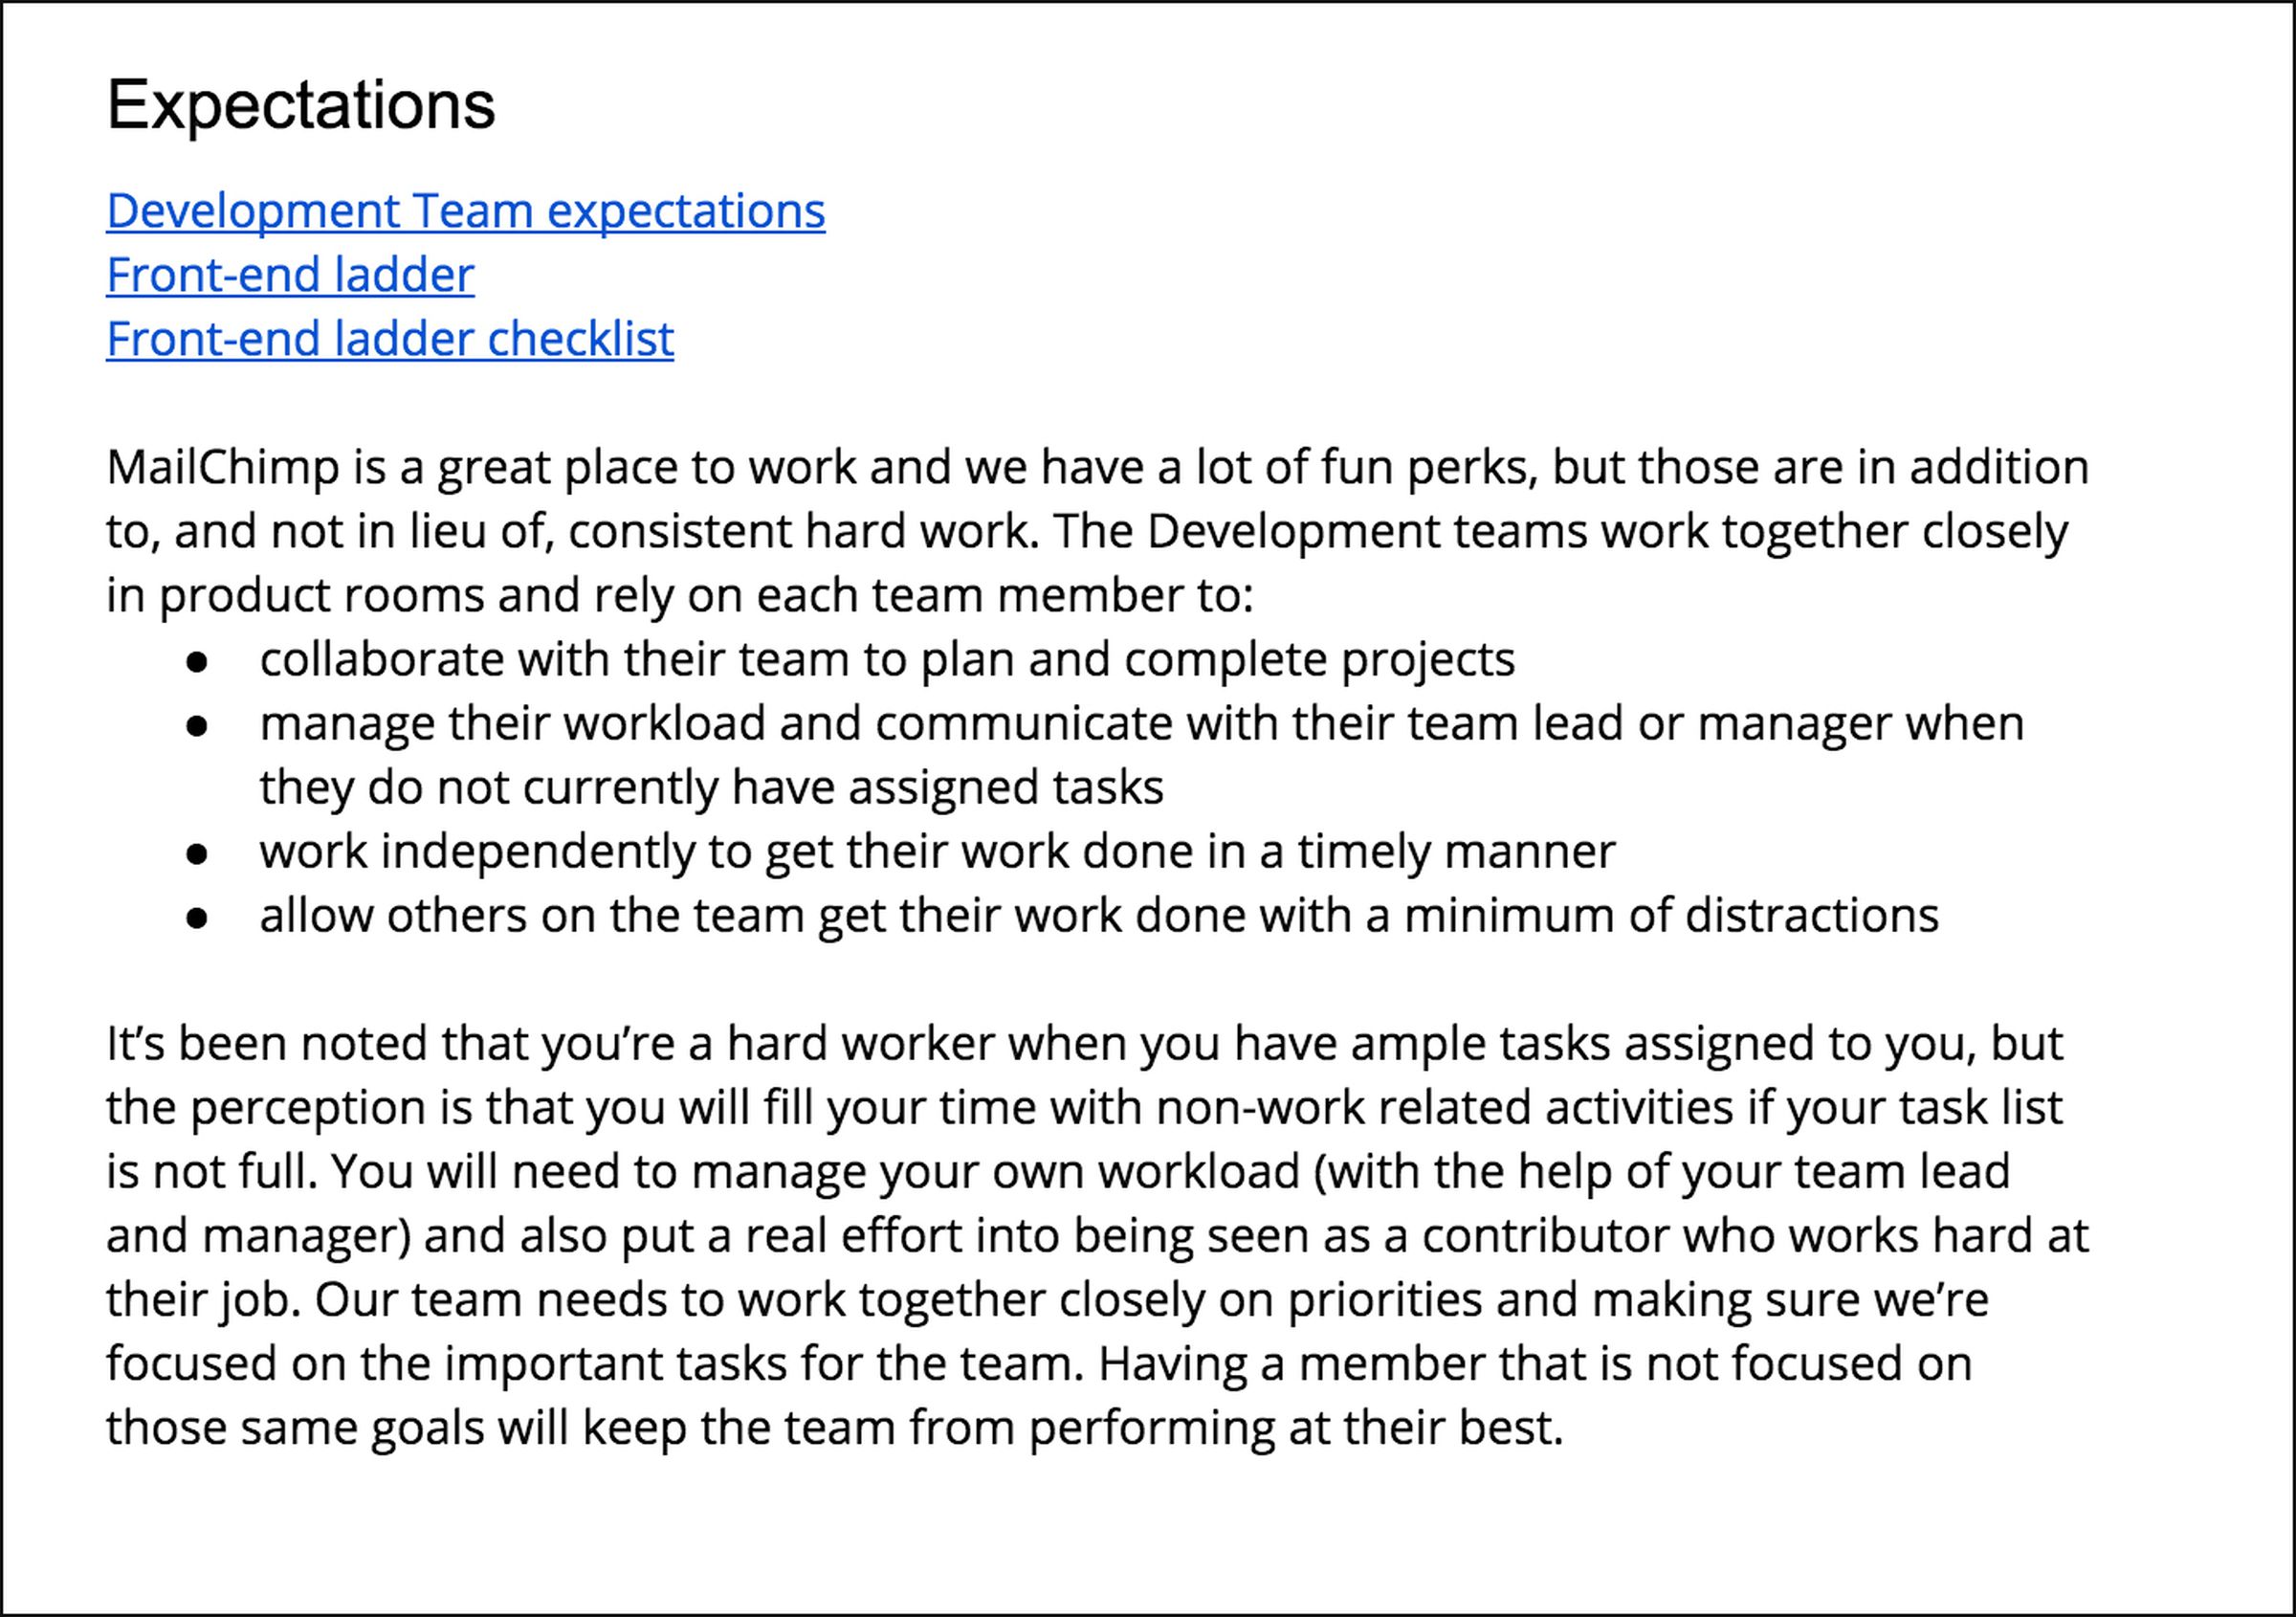 It’s been noted that you’re a hard worker when you have ample tasks assigned to you, but the perception is that you will fill your time with non-work related activities if your task list is not full. You will need to manage your own workload (with the help of your team lead and manager) and also put a real effort into being seen as a contributor who works hard at their job.